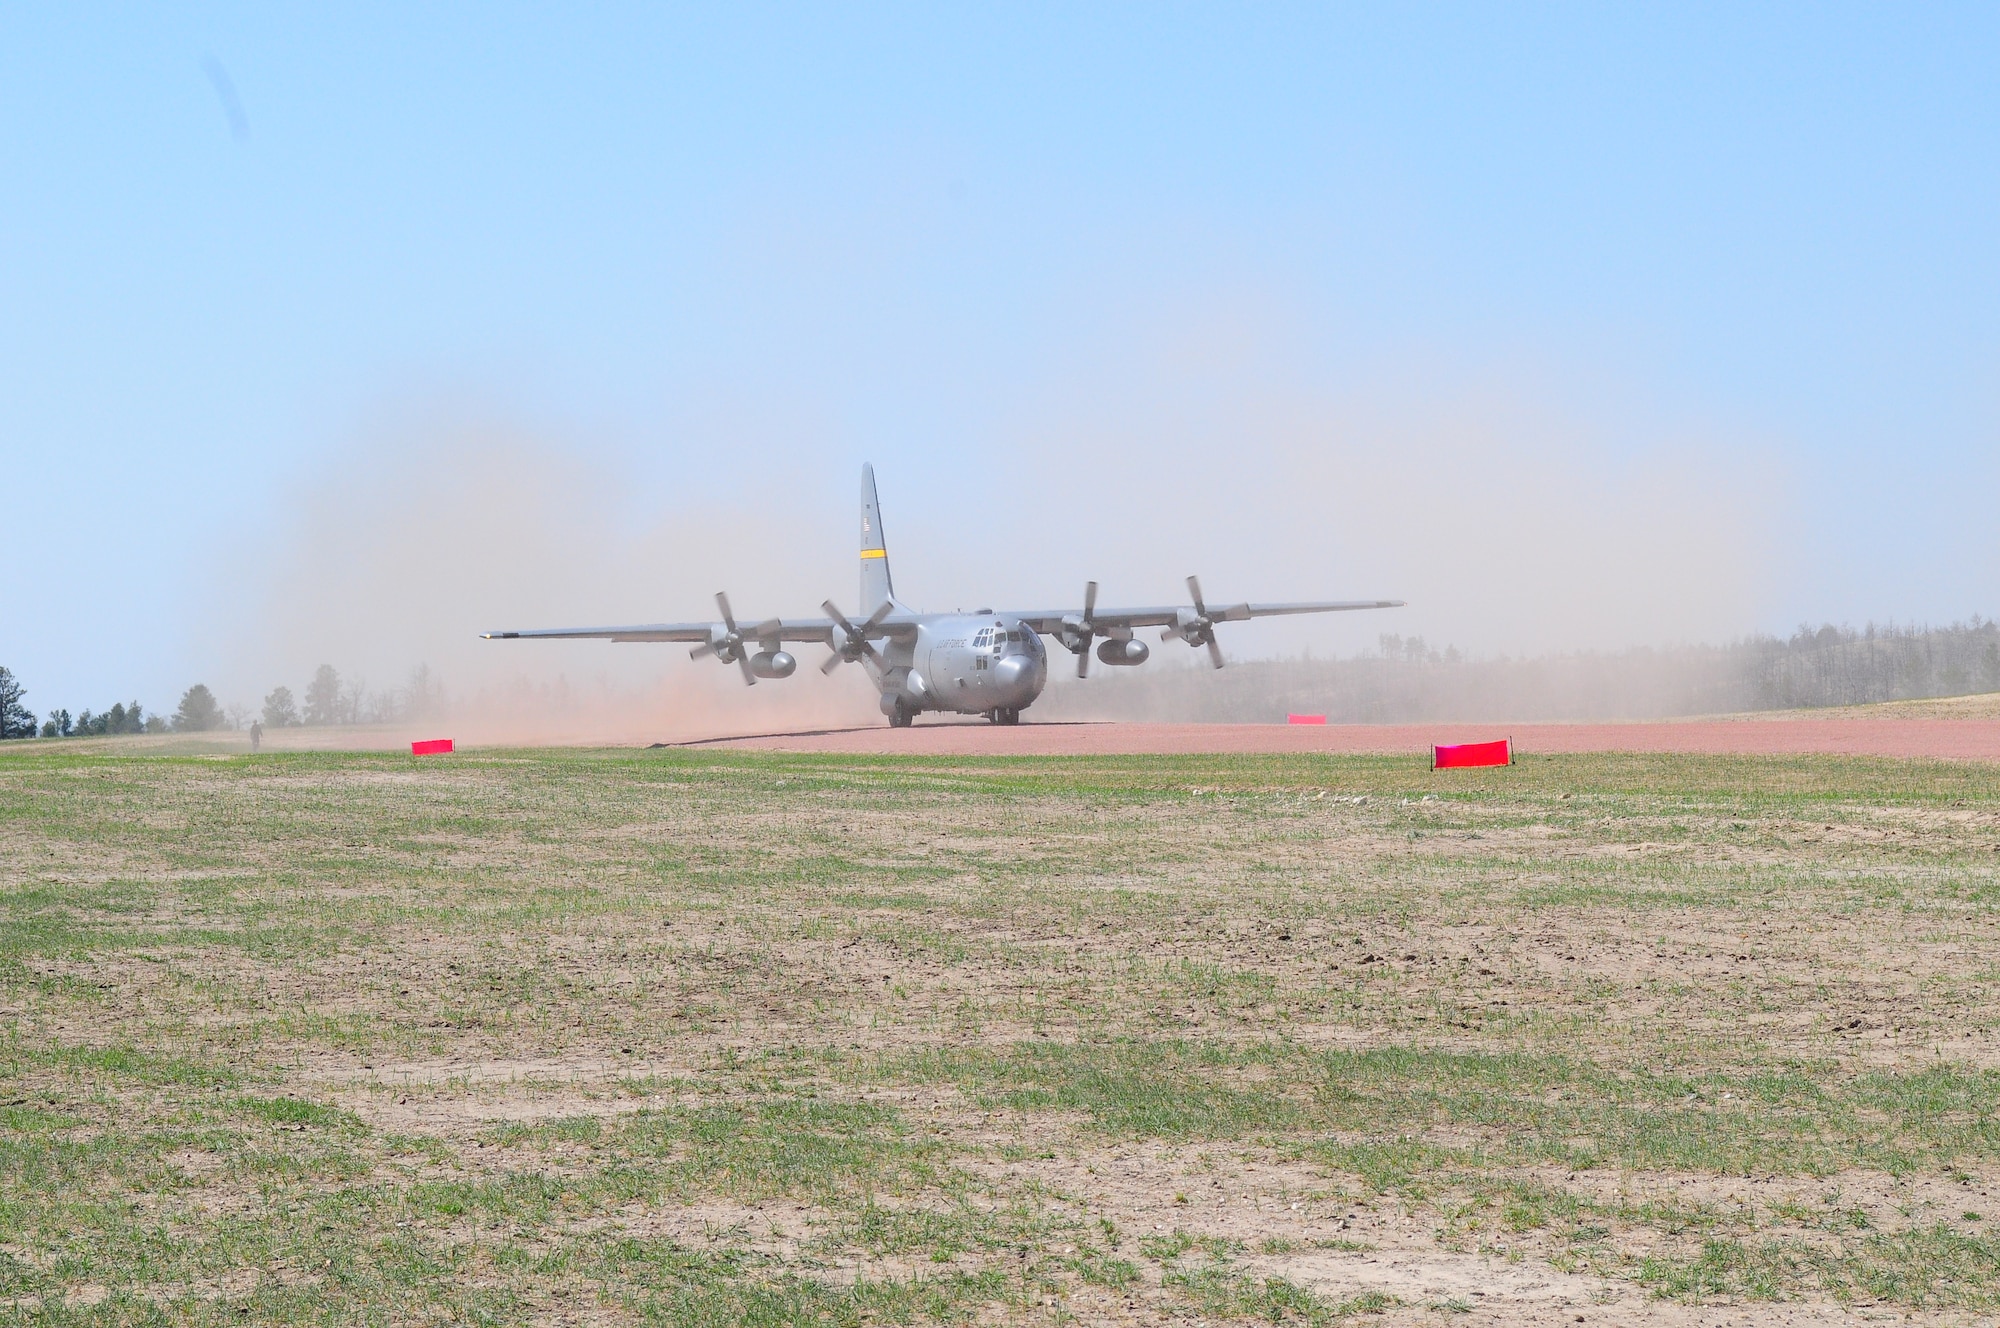 A Wyoming Air National Guard C-130 Hercules, assigned to the 153rd Airlift Wing, becomes the first to test the new Lt. Gen. Wright Tactical Airfield at the Camp Guernsey Joint Training Center's North Training Area, May 15, 2012. The airfield concept for Camp Guernsey was conceived 20 years ago and will provide aircrews real-world tactical training in coordination with ground combat forces. (Photo by Dewey Baars)